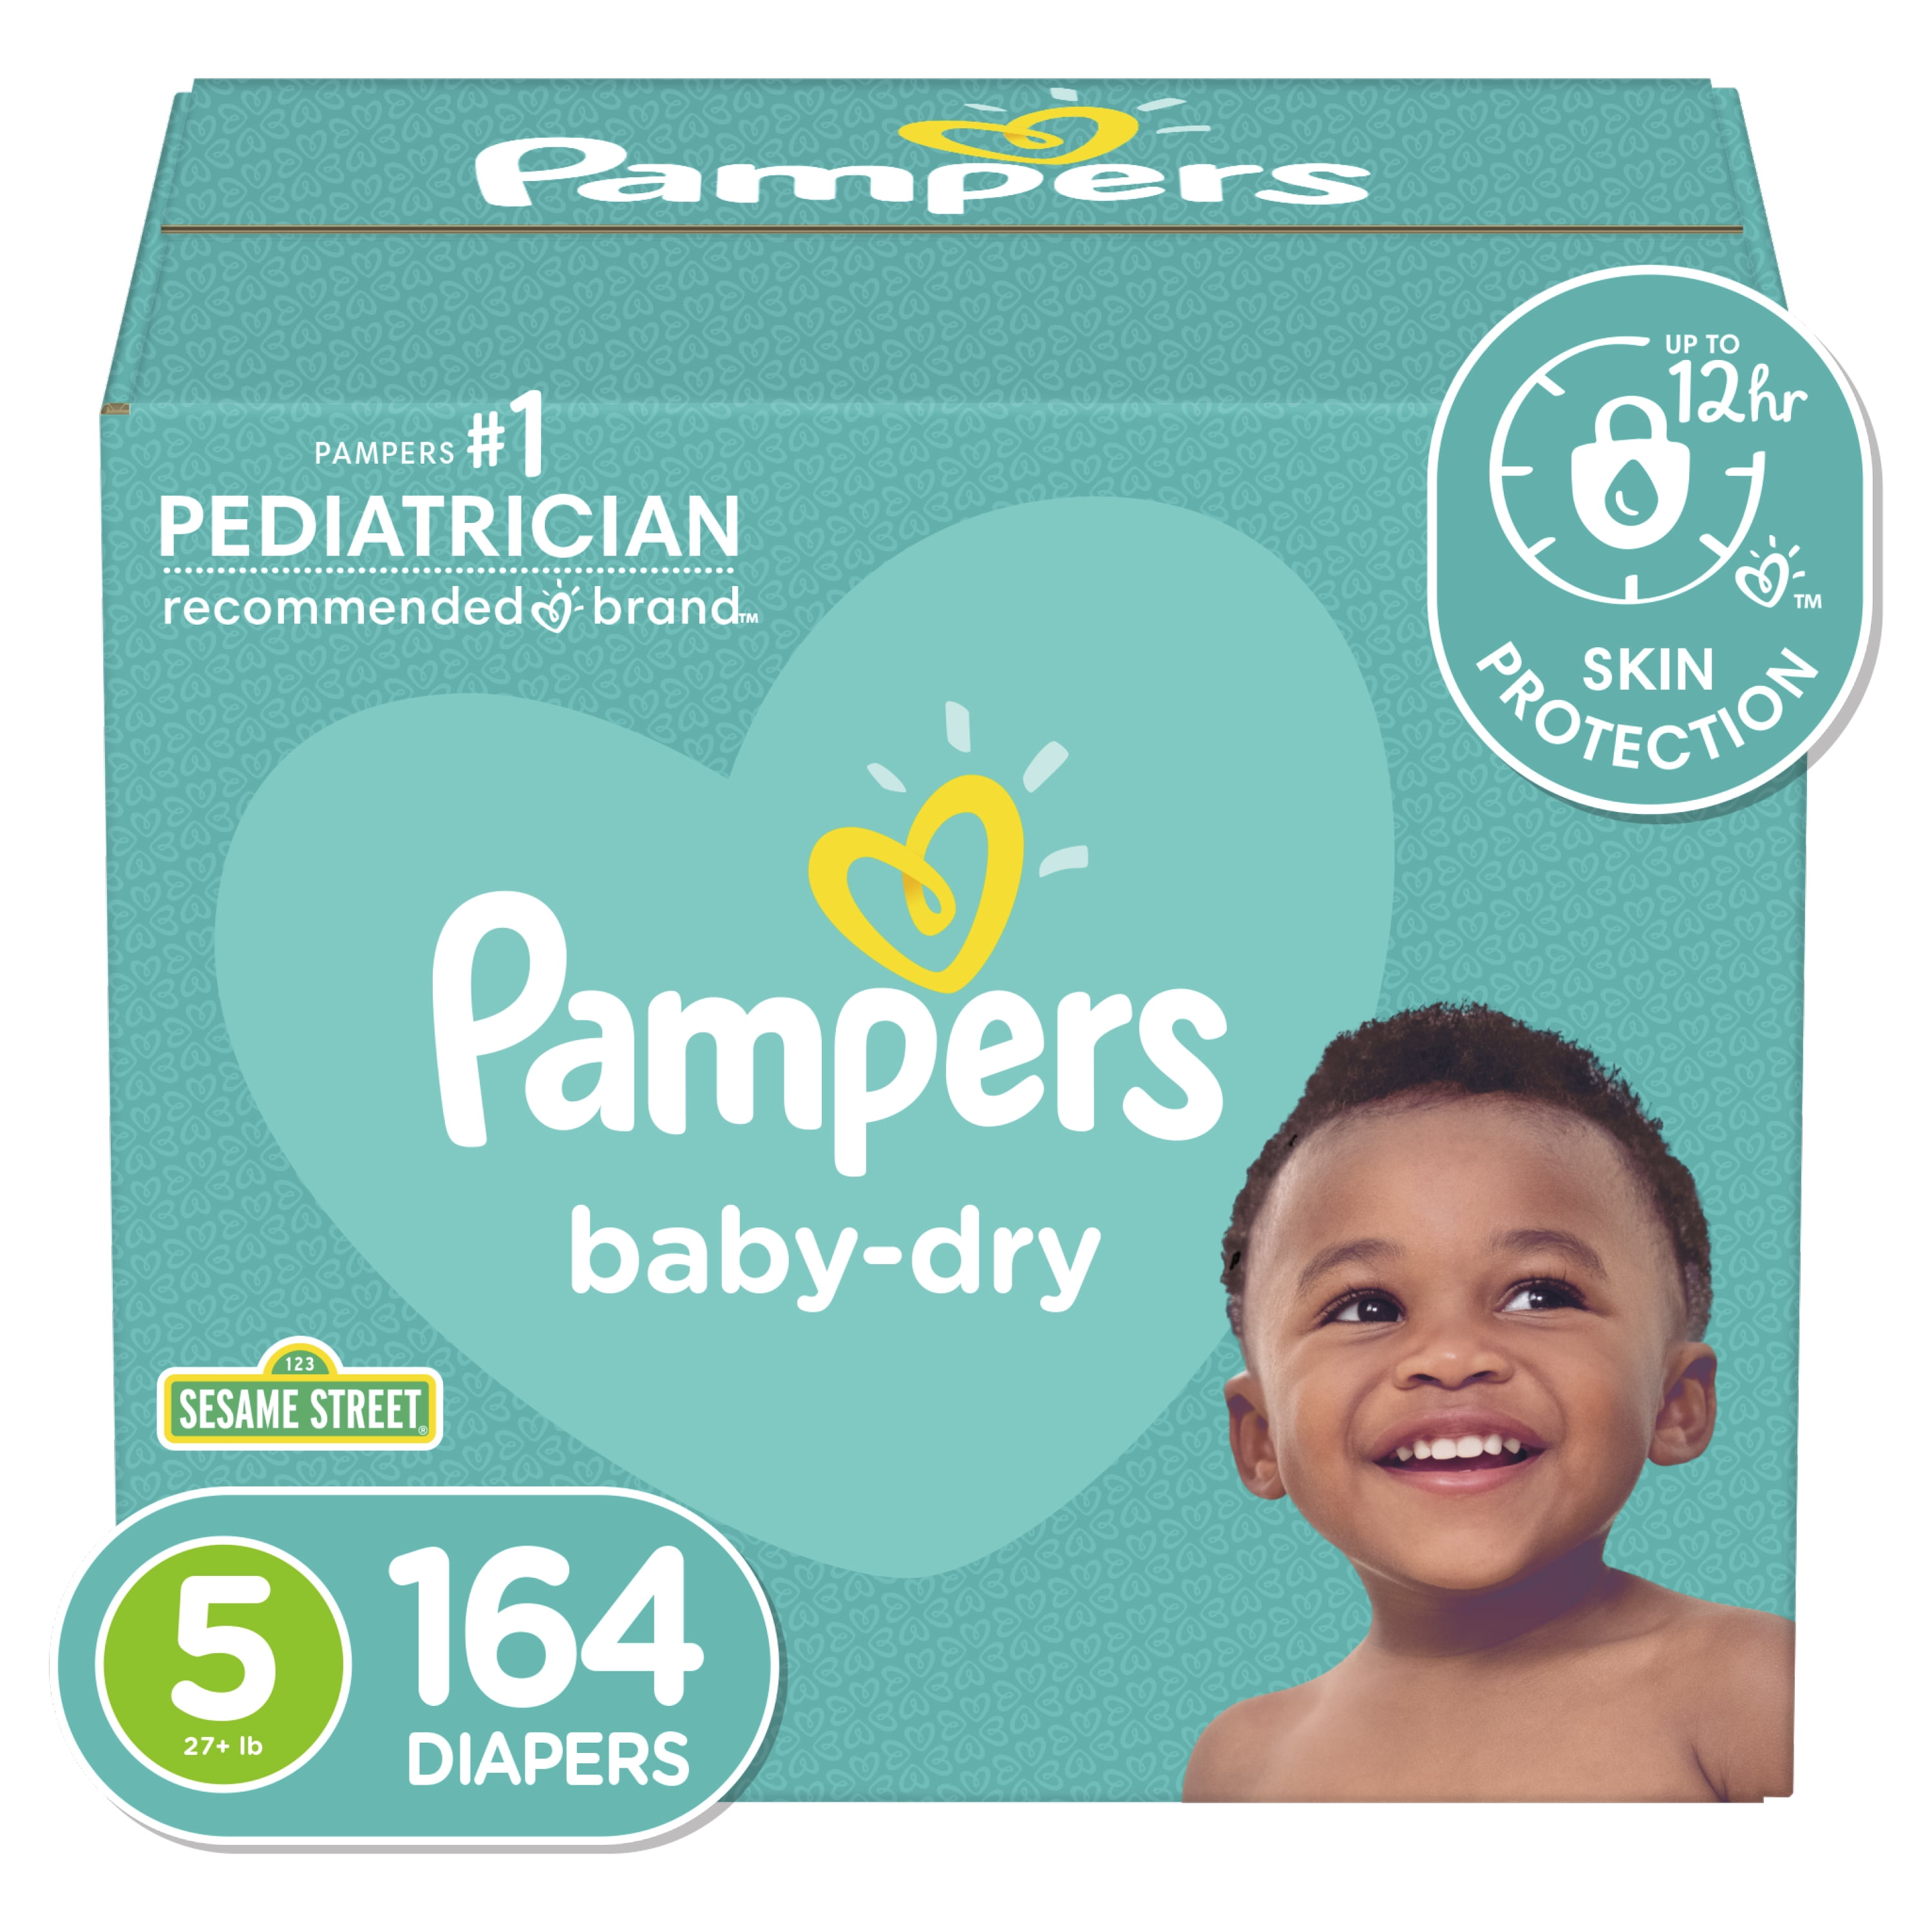 boete zin Mechanica Pampers Baby-Dry Extra Protection Diapers, Size 5, 164 Count - Walmart.com